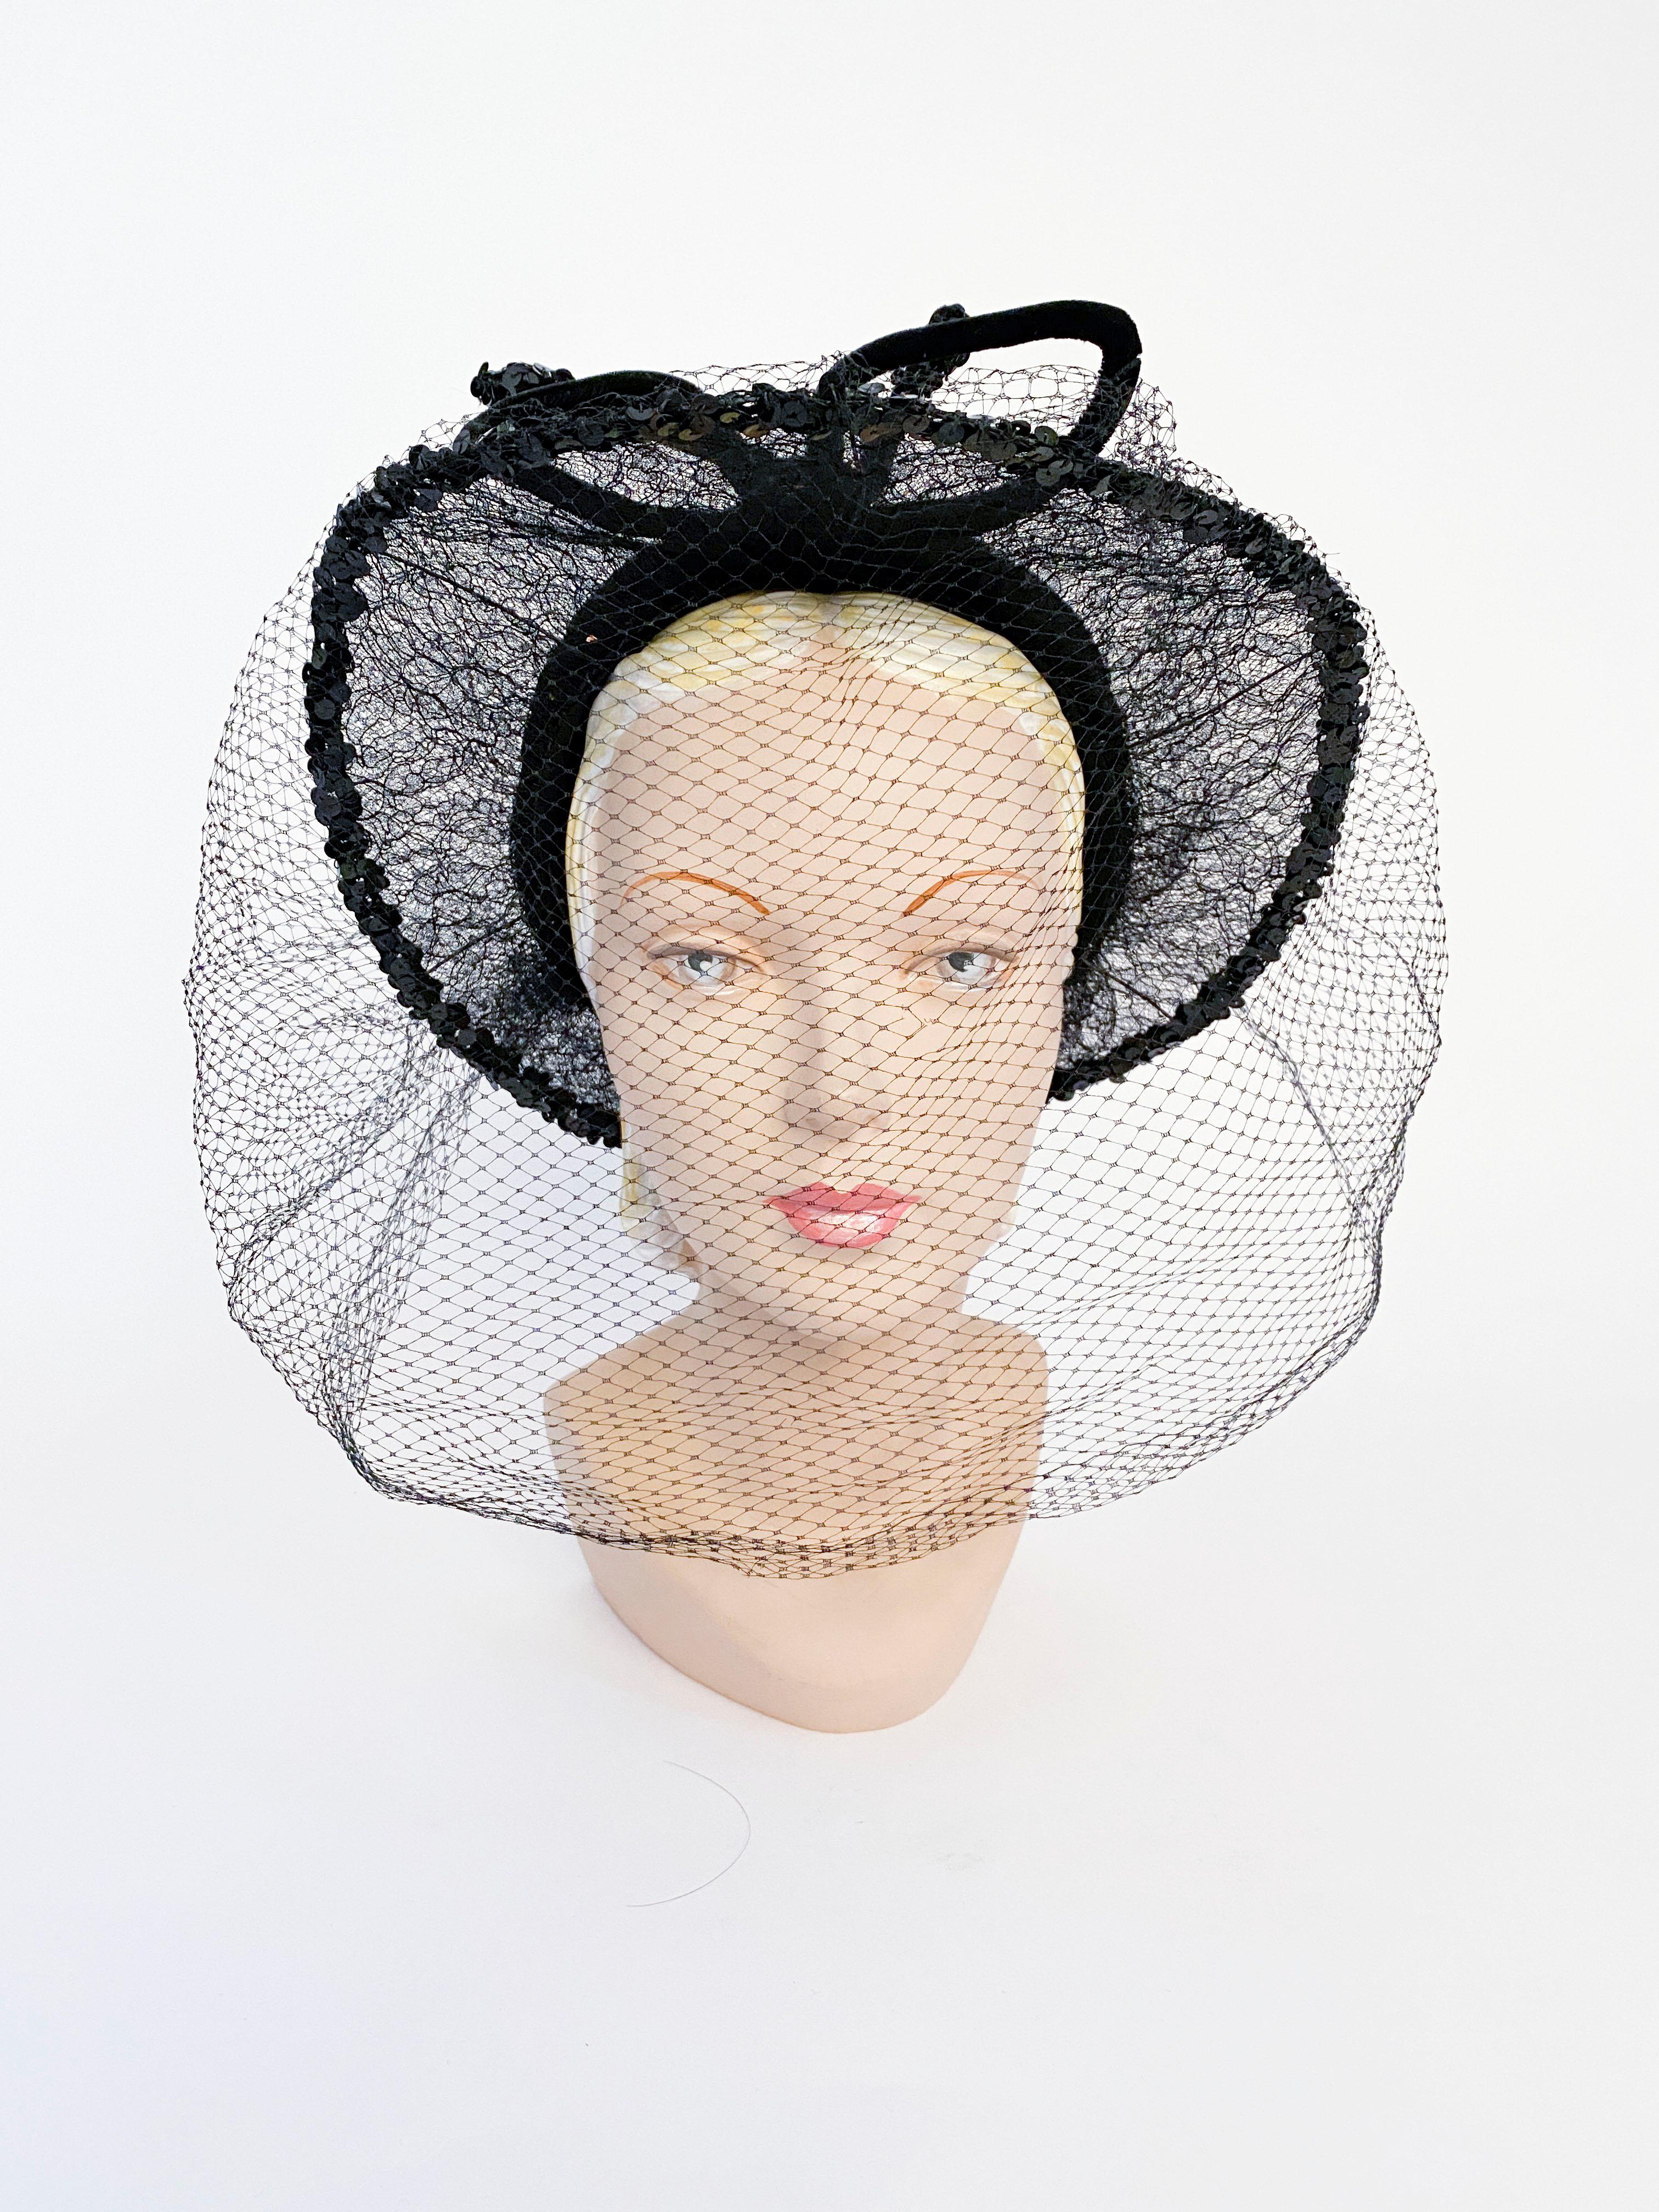 Late 1930s/ early 1940s black silk velvet hat with an extended and wired lace brim trimmed in sequin. The crown of the hat is finished with a velvet cord wired bow and a full face veil gathered in the back.